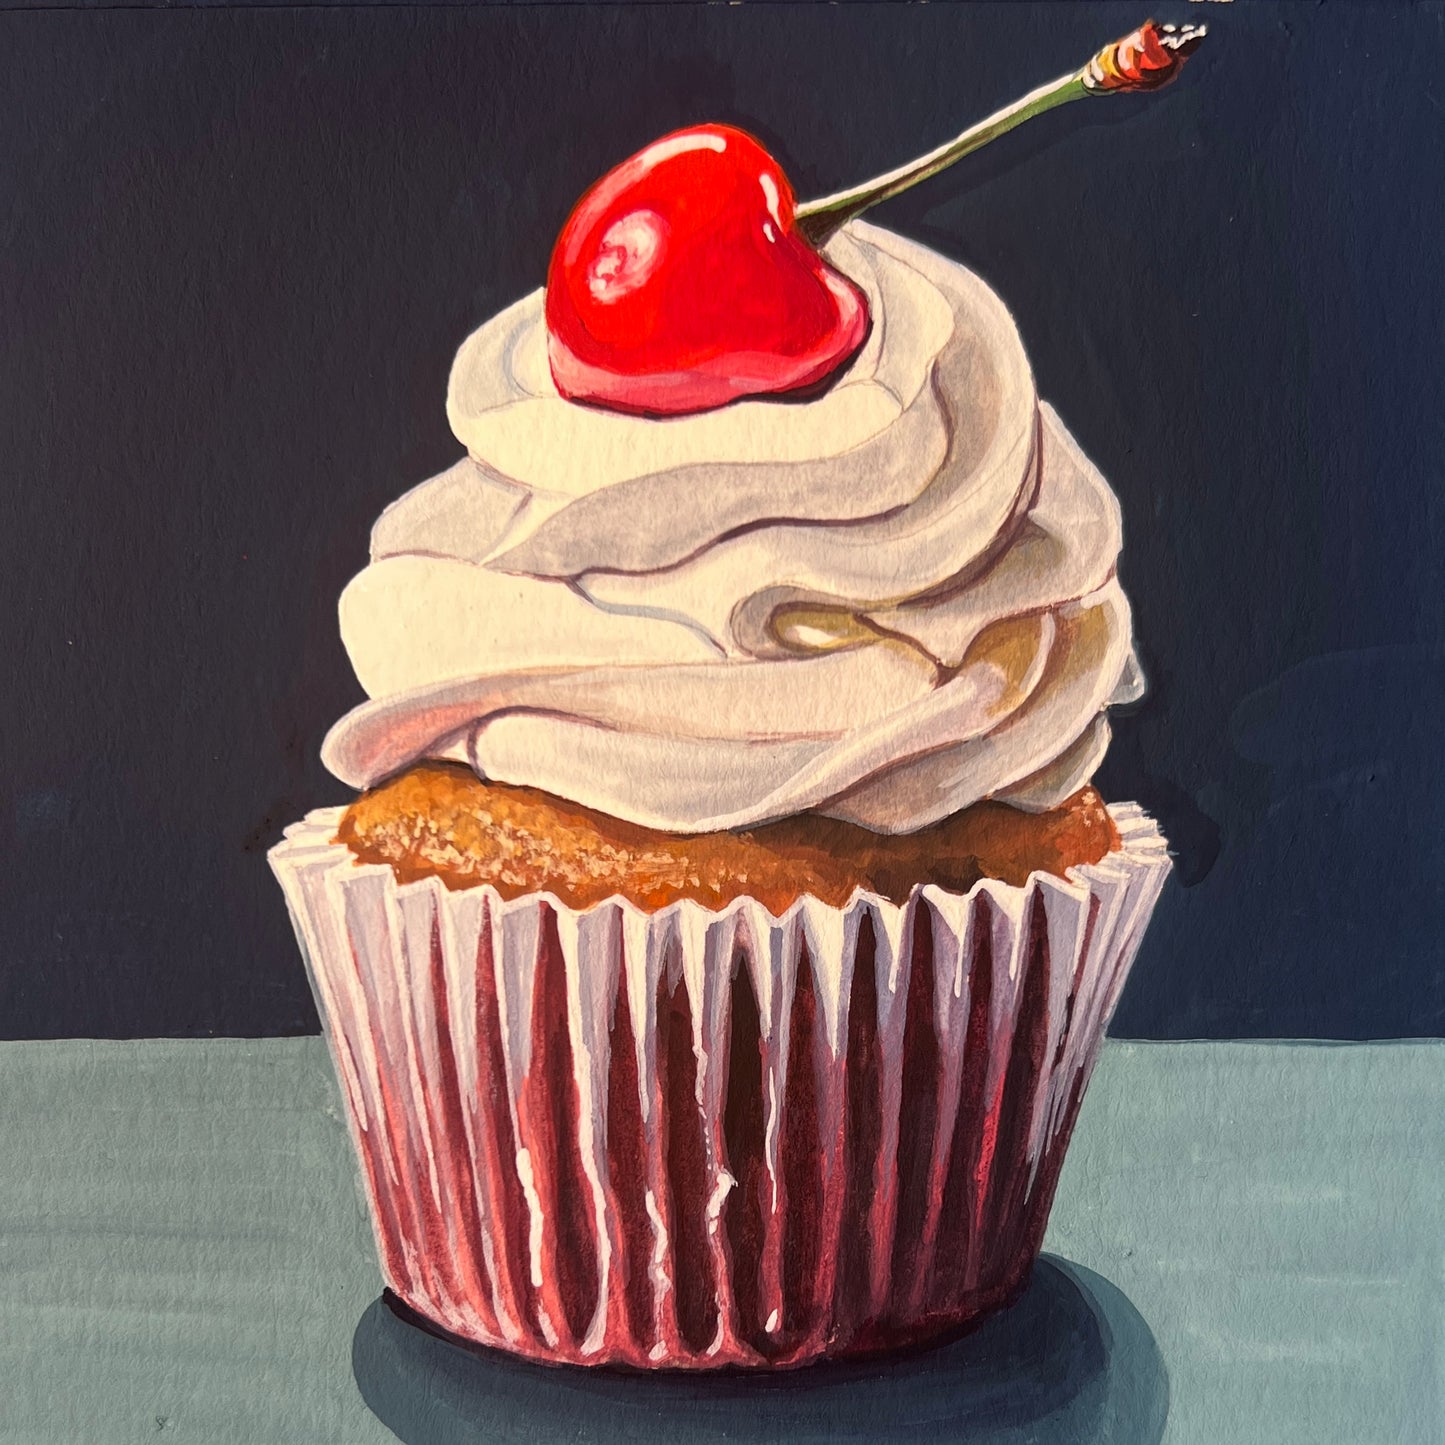 Cupcake with a Cherry